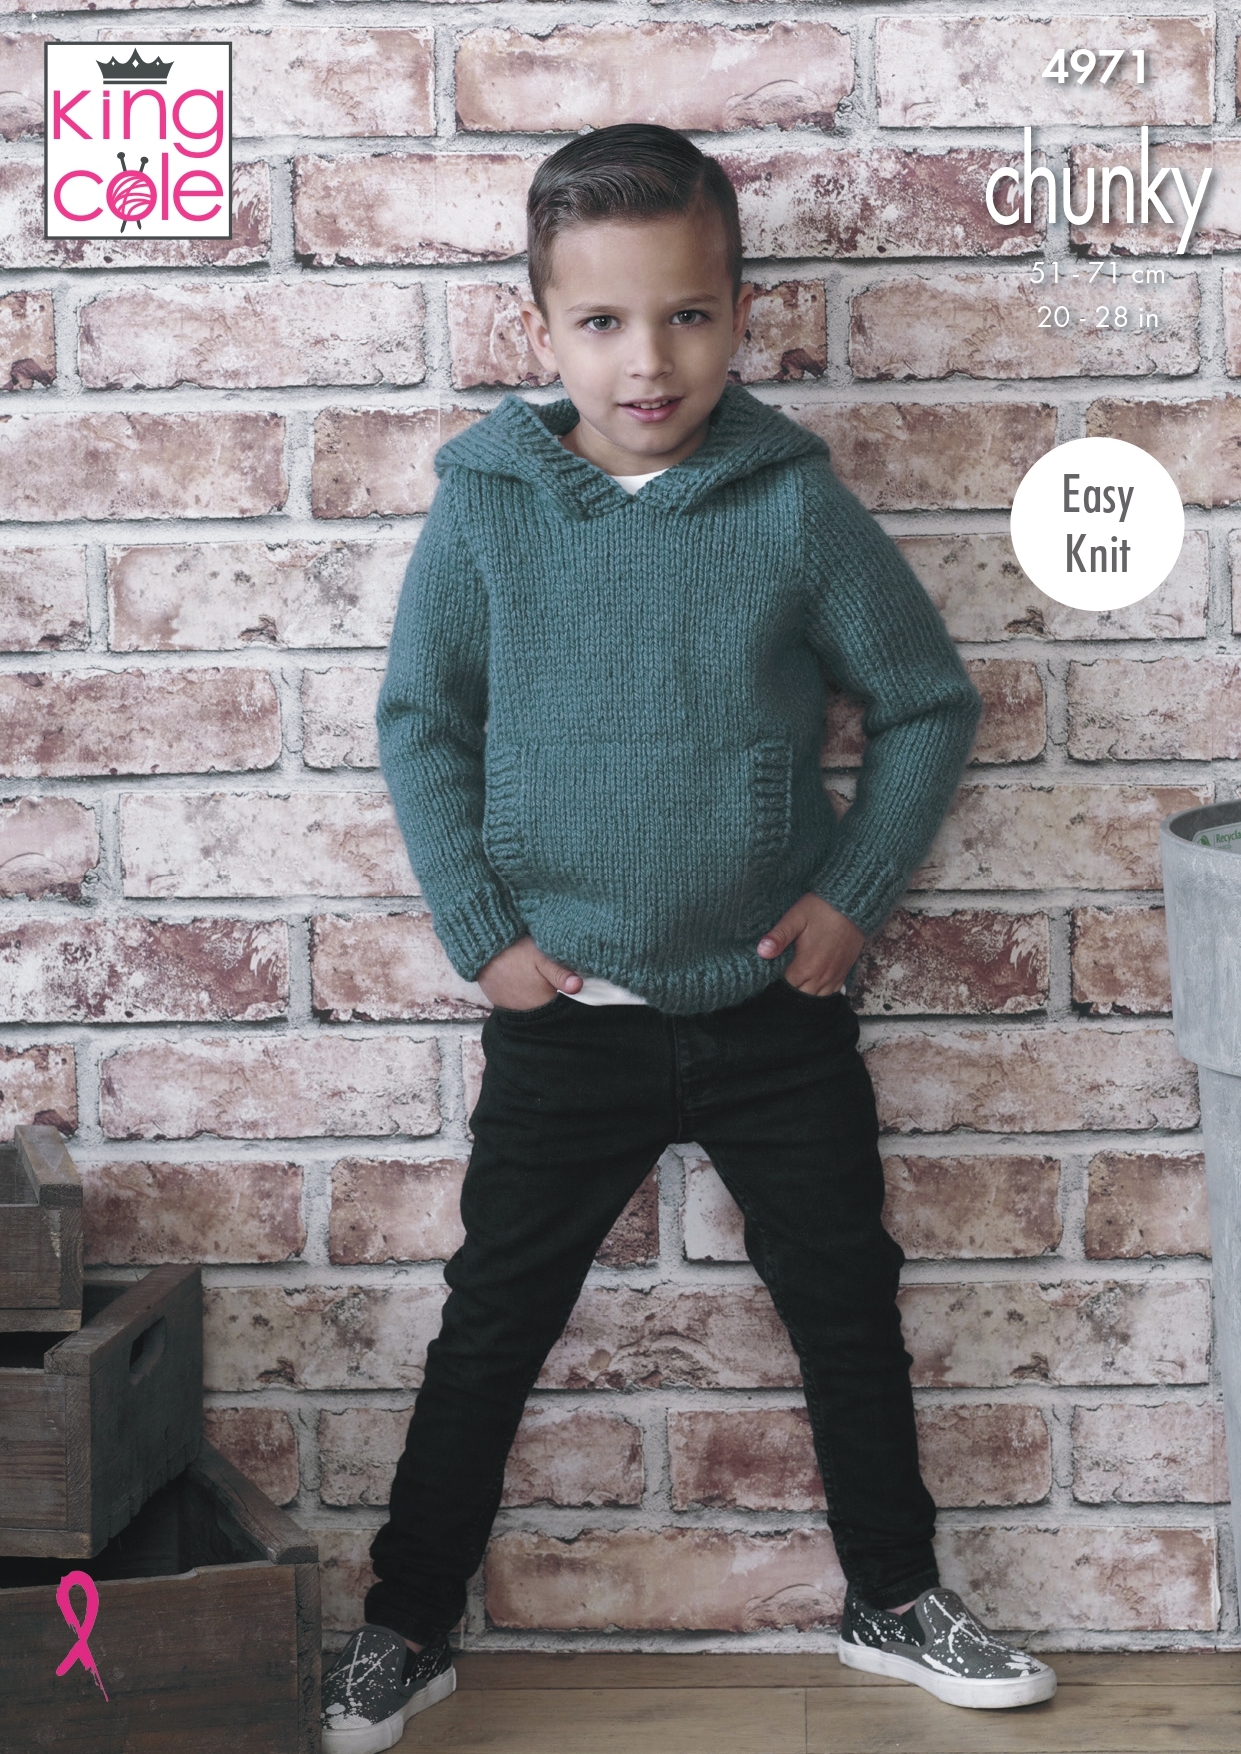 5483 King Cole Boys Double Knitting Pattern Raglan Sleeve Round Neck or Hooded Sweater 